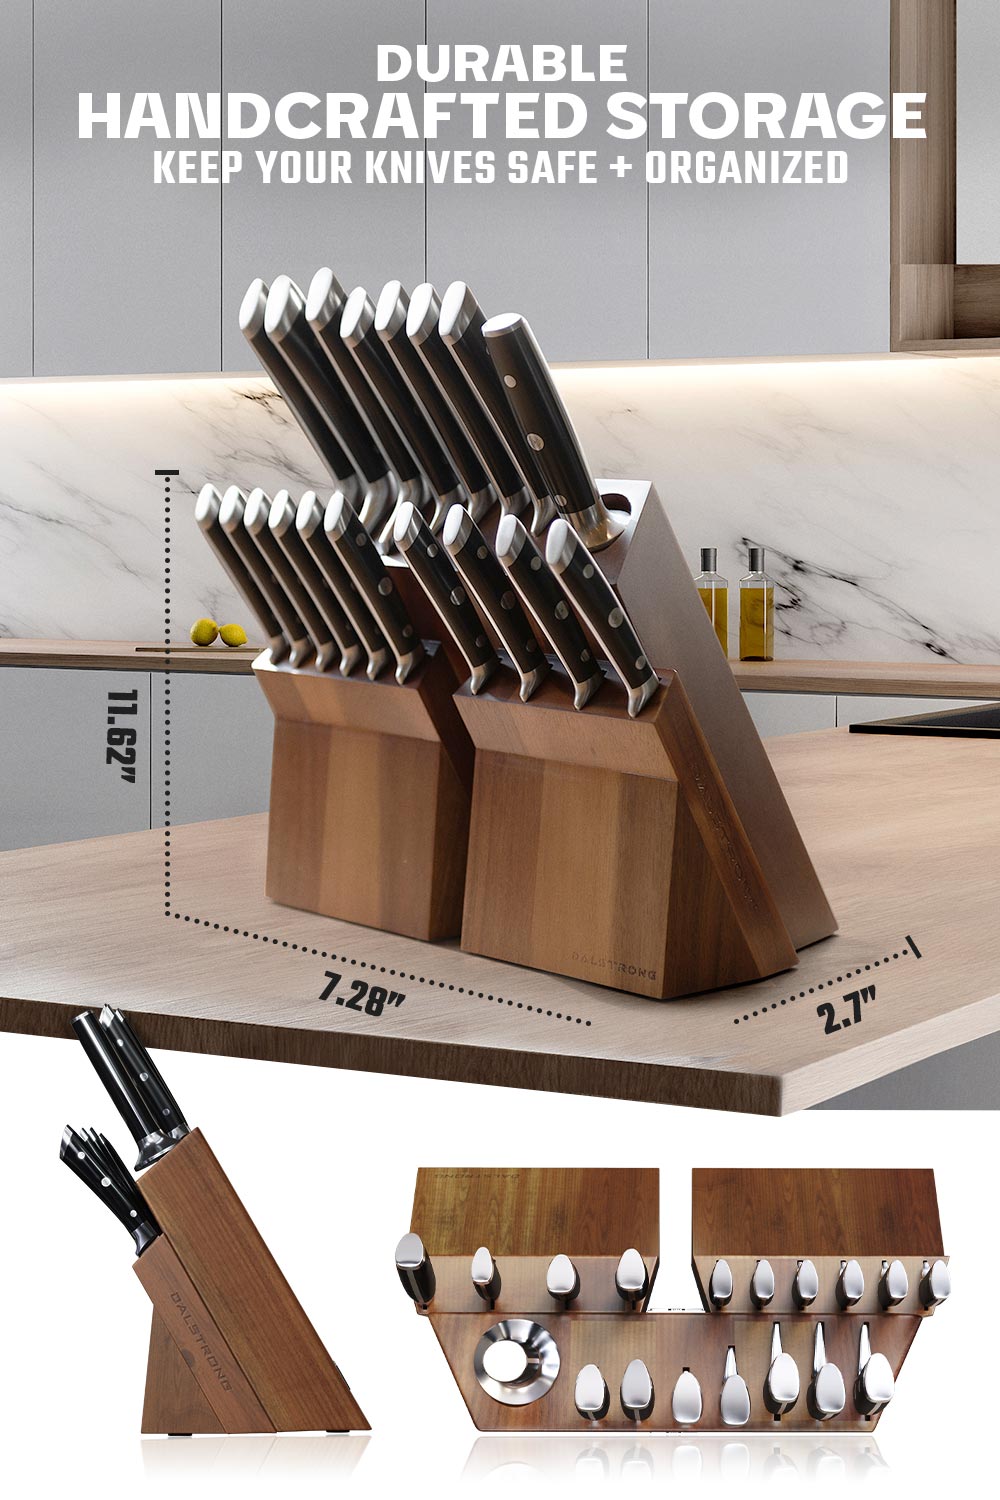 Dalstrong gladiator series 18 piece knife set featuring it's block size in the kitchen.